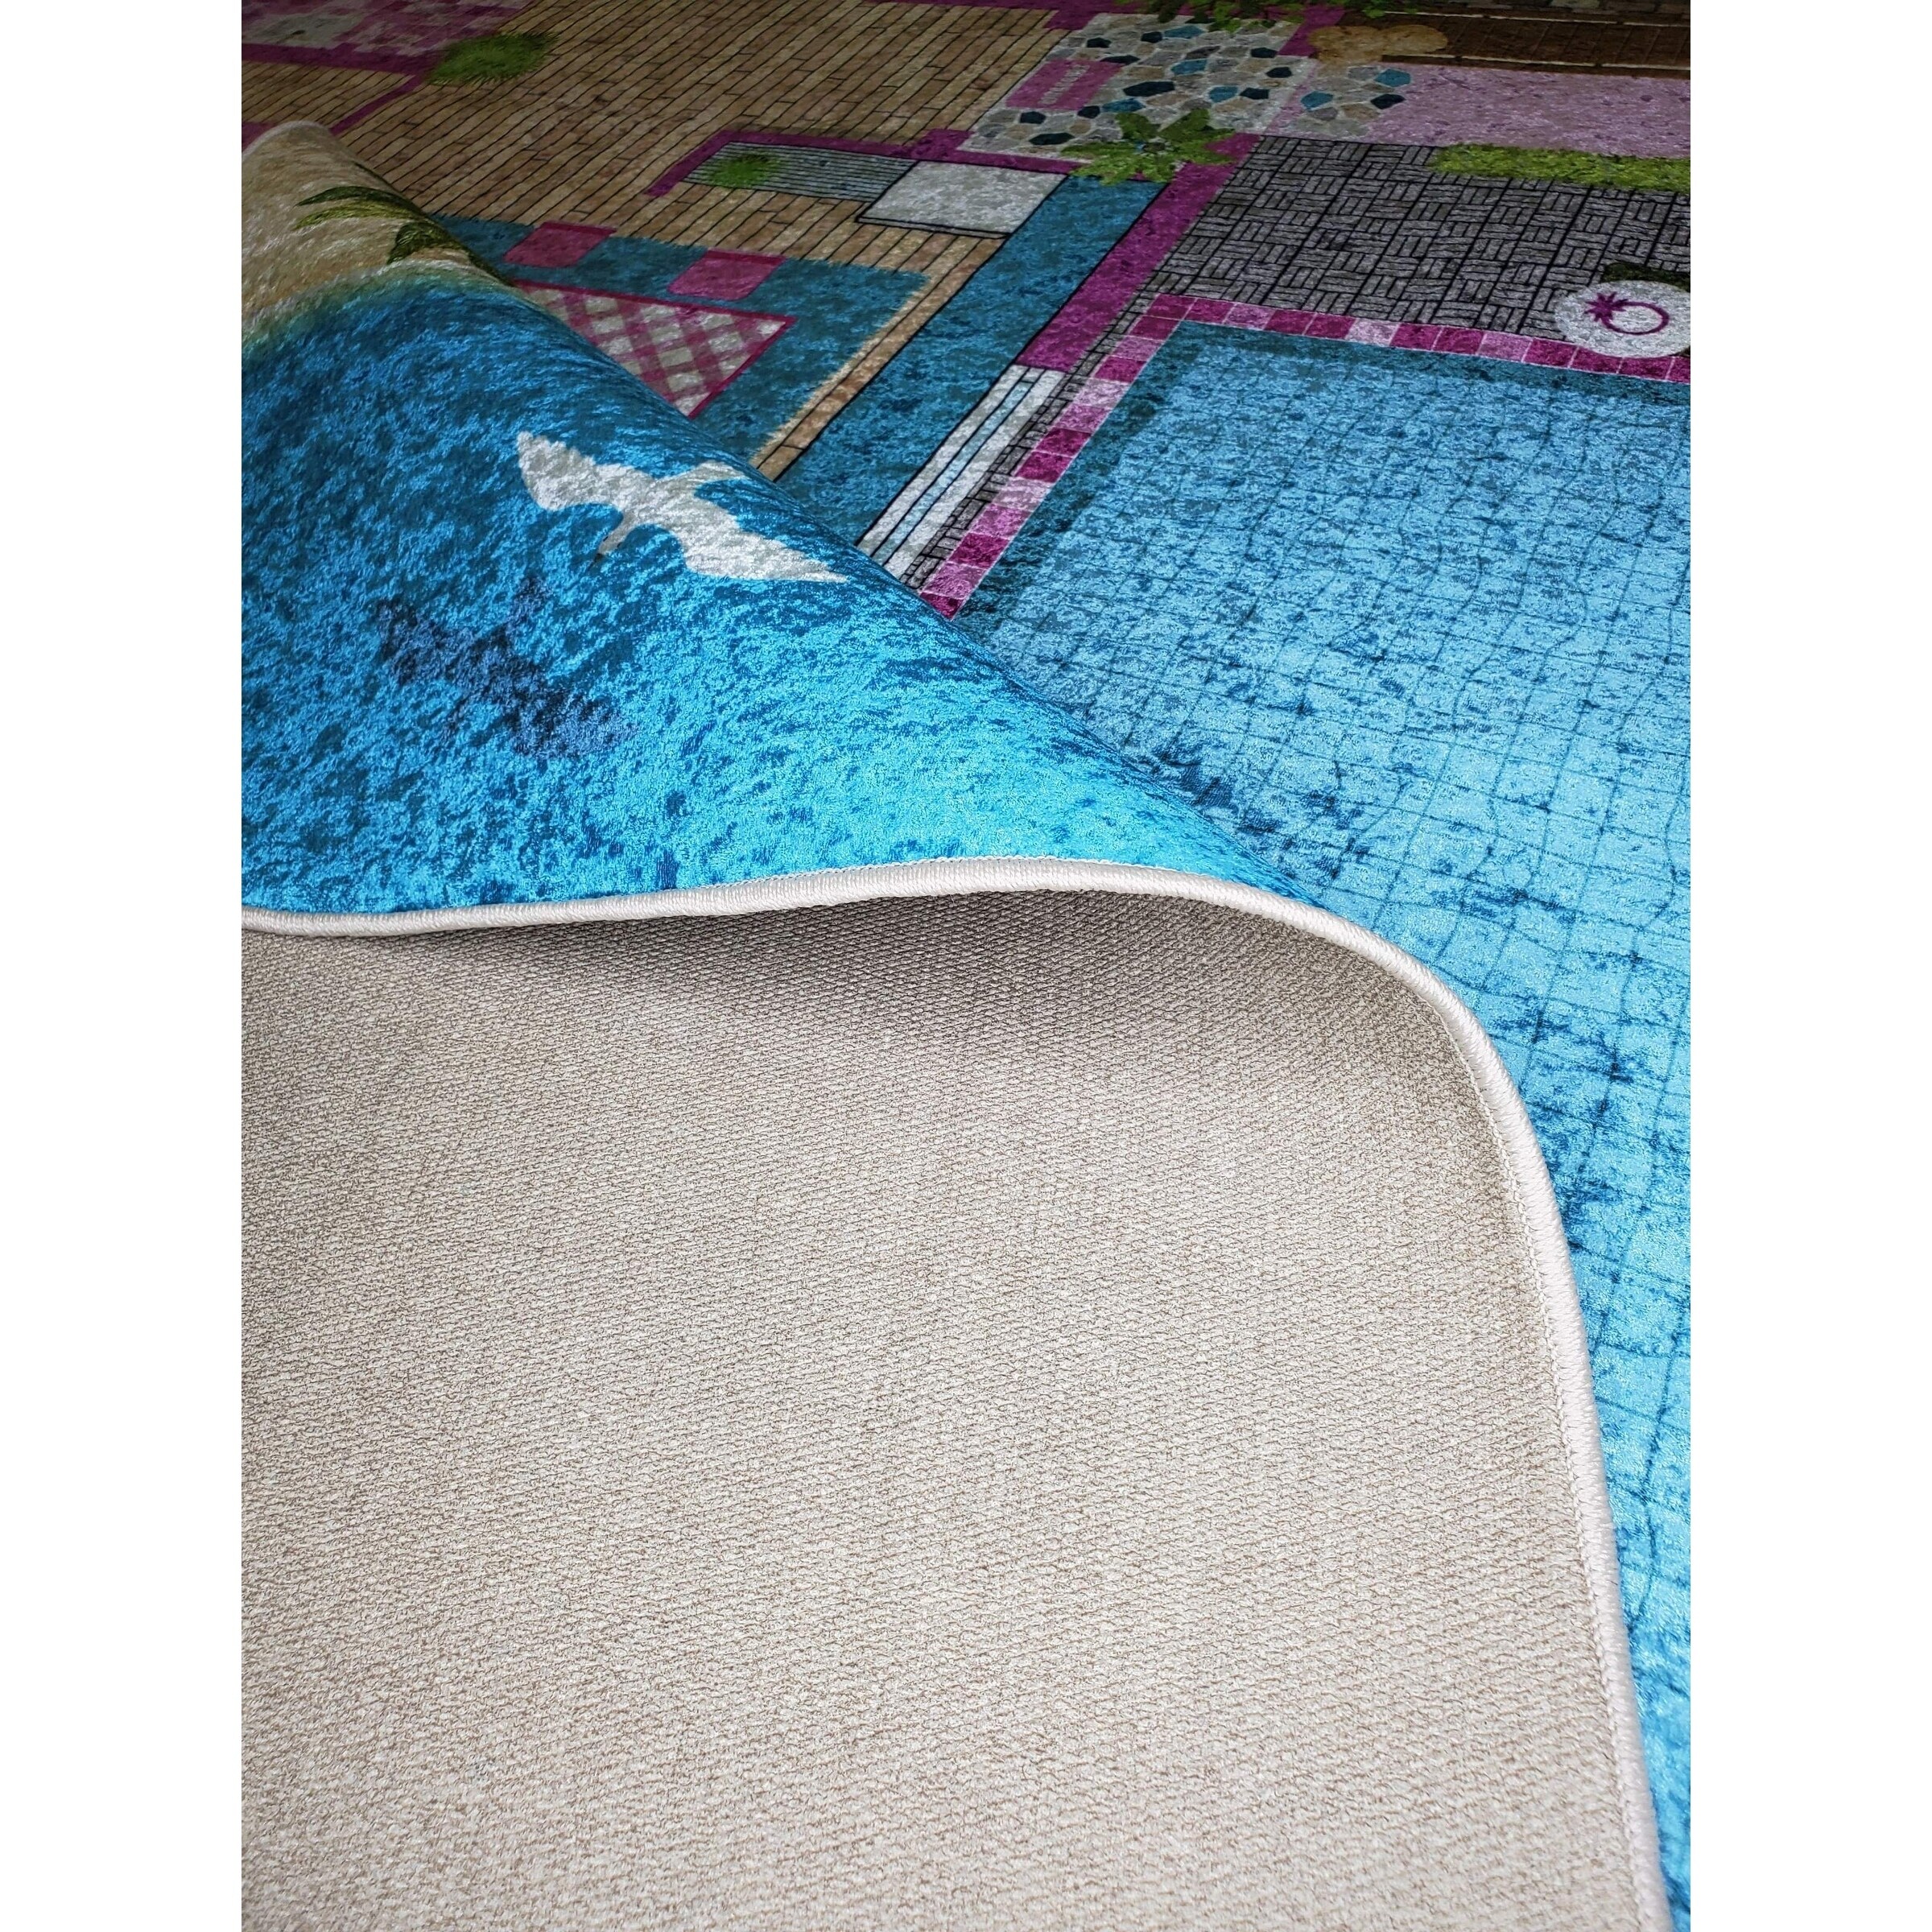 https://ak1.ostkcdn.com/images/products/29352035/La-Dole-Rugs-Pink-Turquoise-Blue-Barbie-Doll-House-Area-Rug-Mat-For-Kids-Childrens-room-Decoration-Playroom-5x7-8x10-7X9-feet-24686820-a9ea-48dd-8507-2c42b8251aa6.jpg